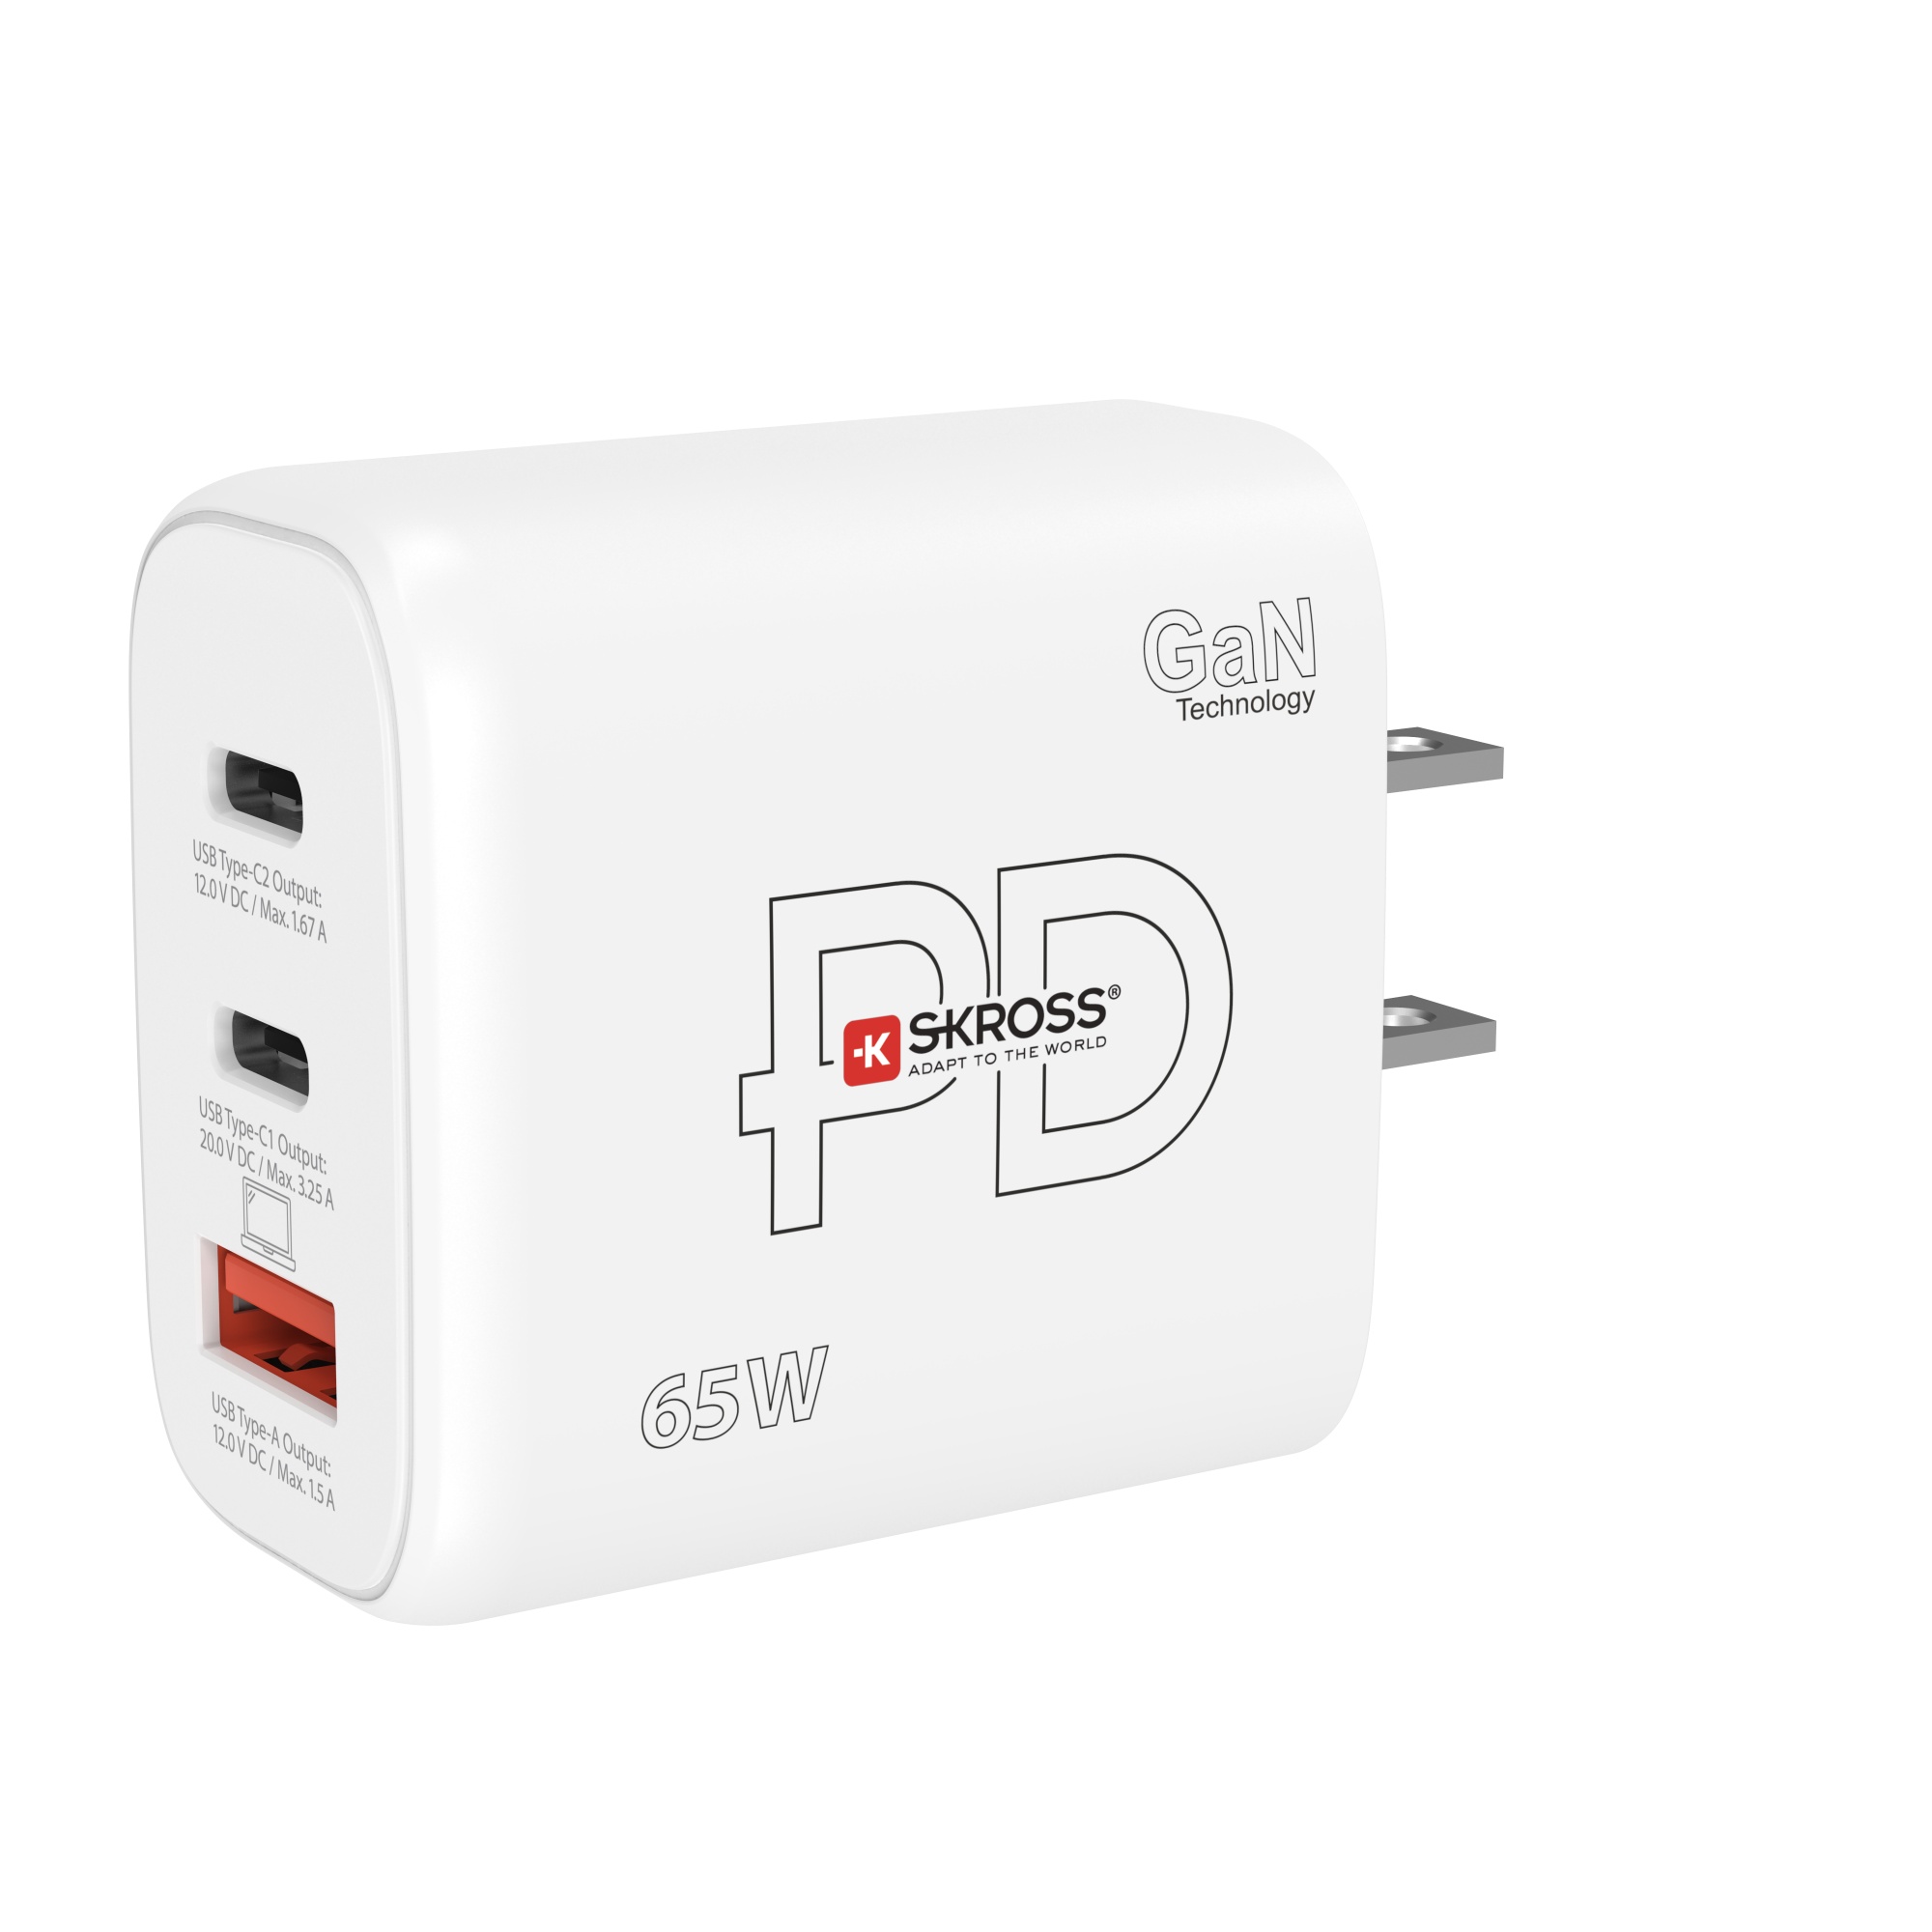 Power Charger 65W GaN US, Small & powerful 65 W PD charging of 3 USB devices (2 x USB C, 1 x USB A). ultra-small, high powered Power Charger USB-C 65